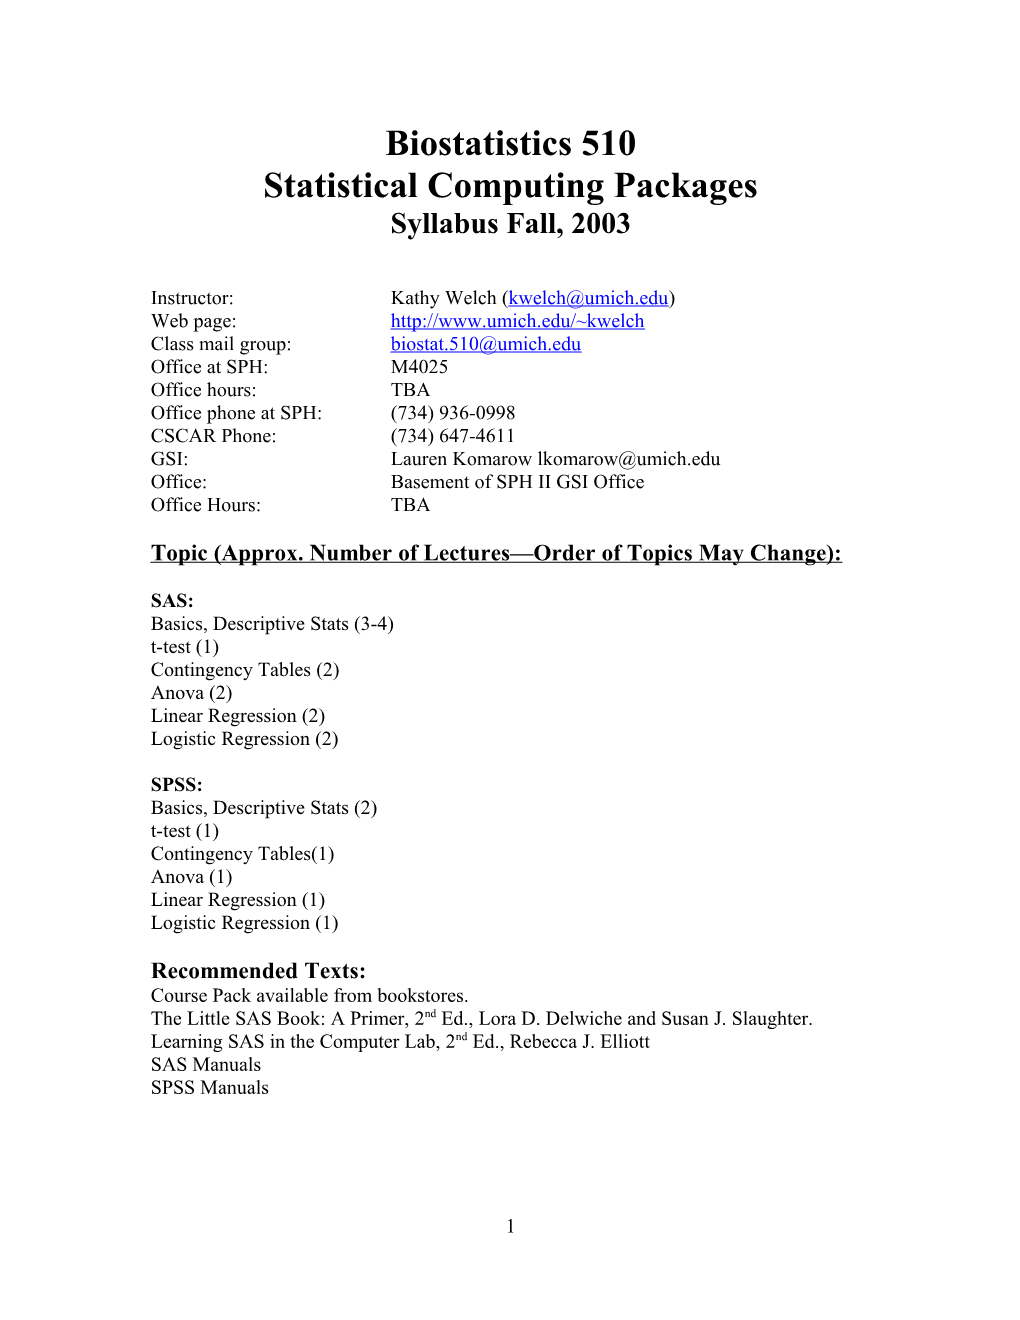 Statistical Computing Packages